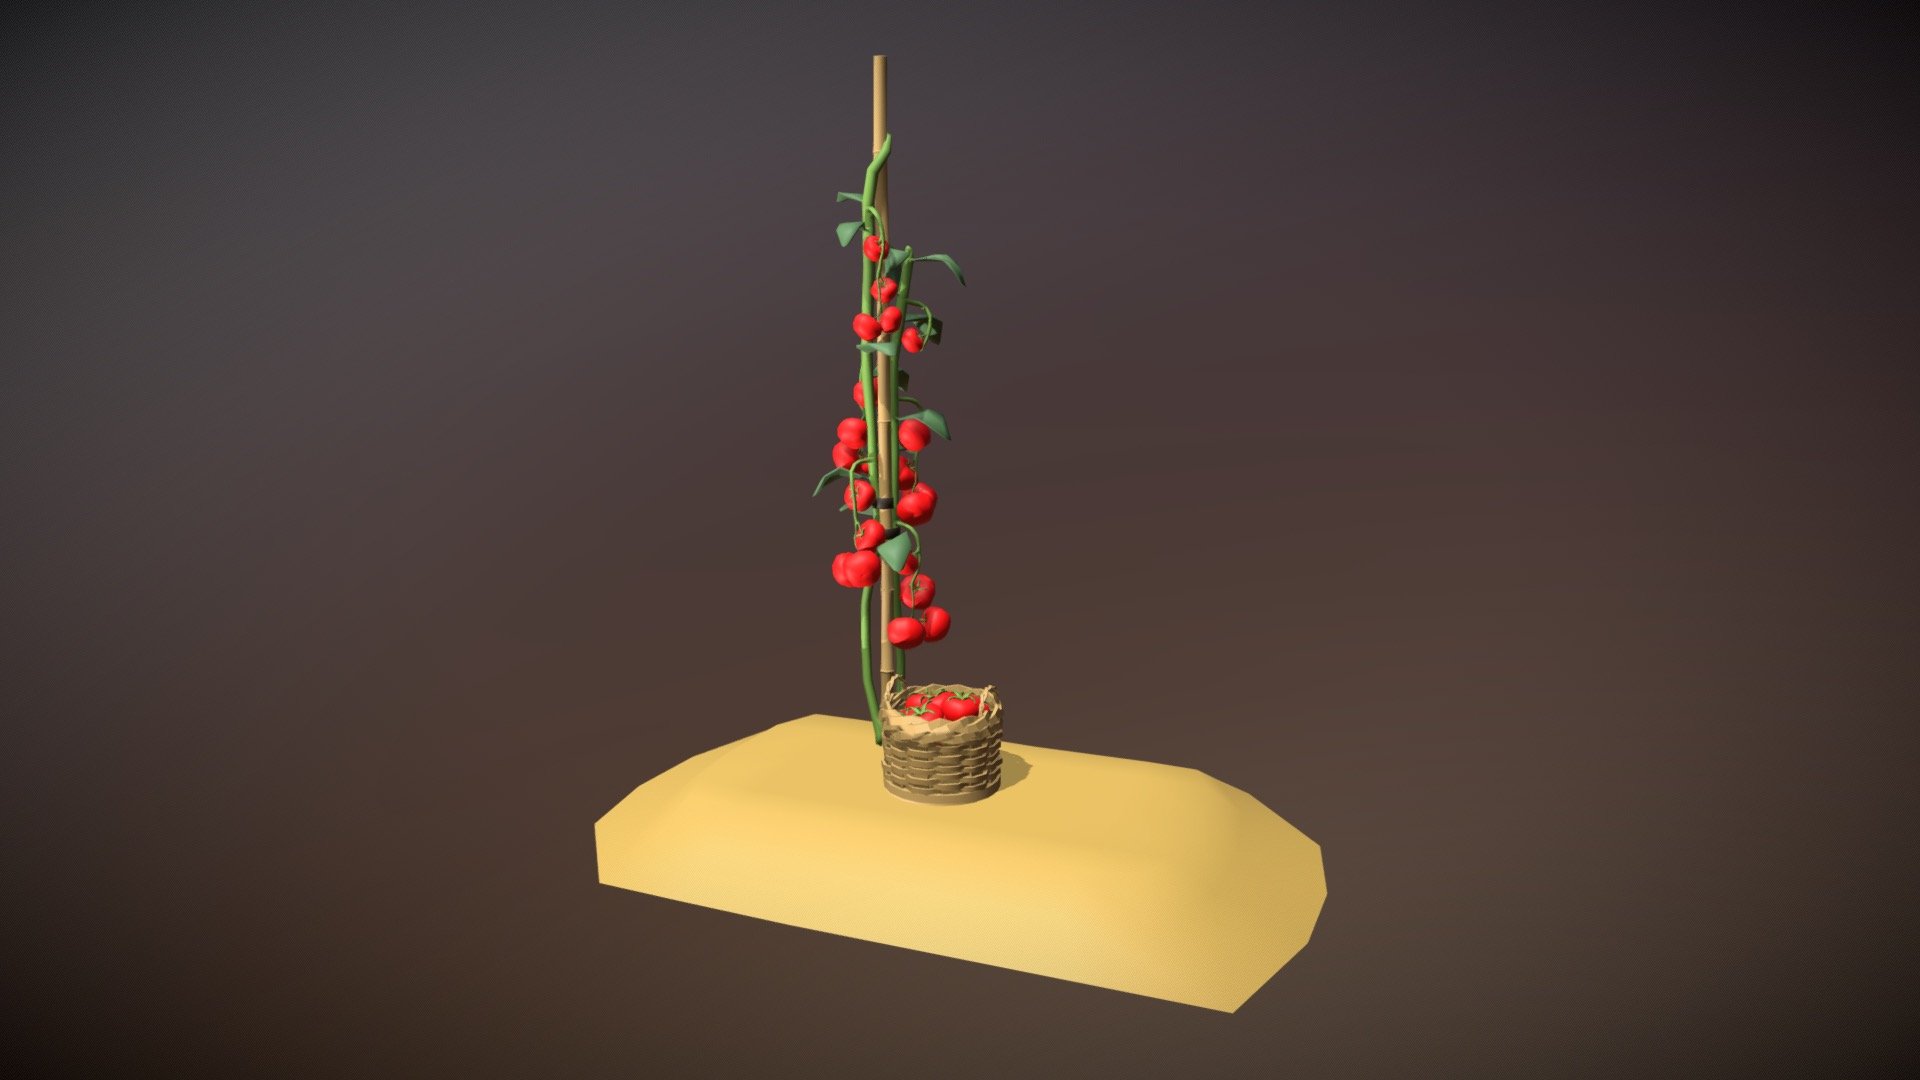 Part of a small gardening set. This is a model of a tomatoplant, together with a small basket full of tomatos. Can be used as a prop in animation 3d model